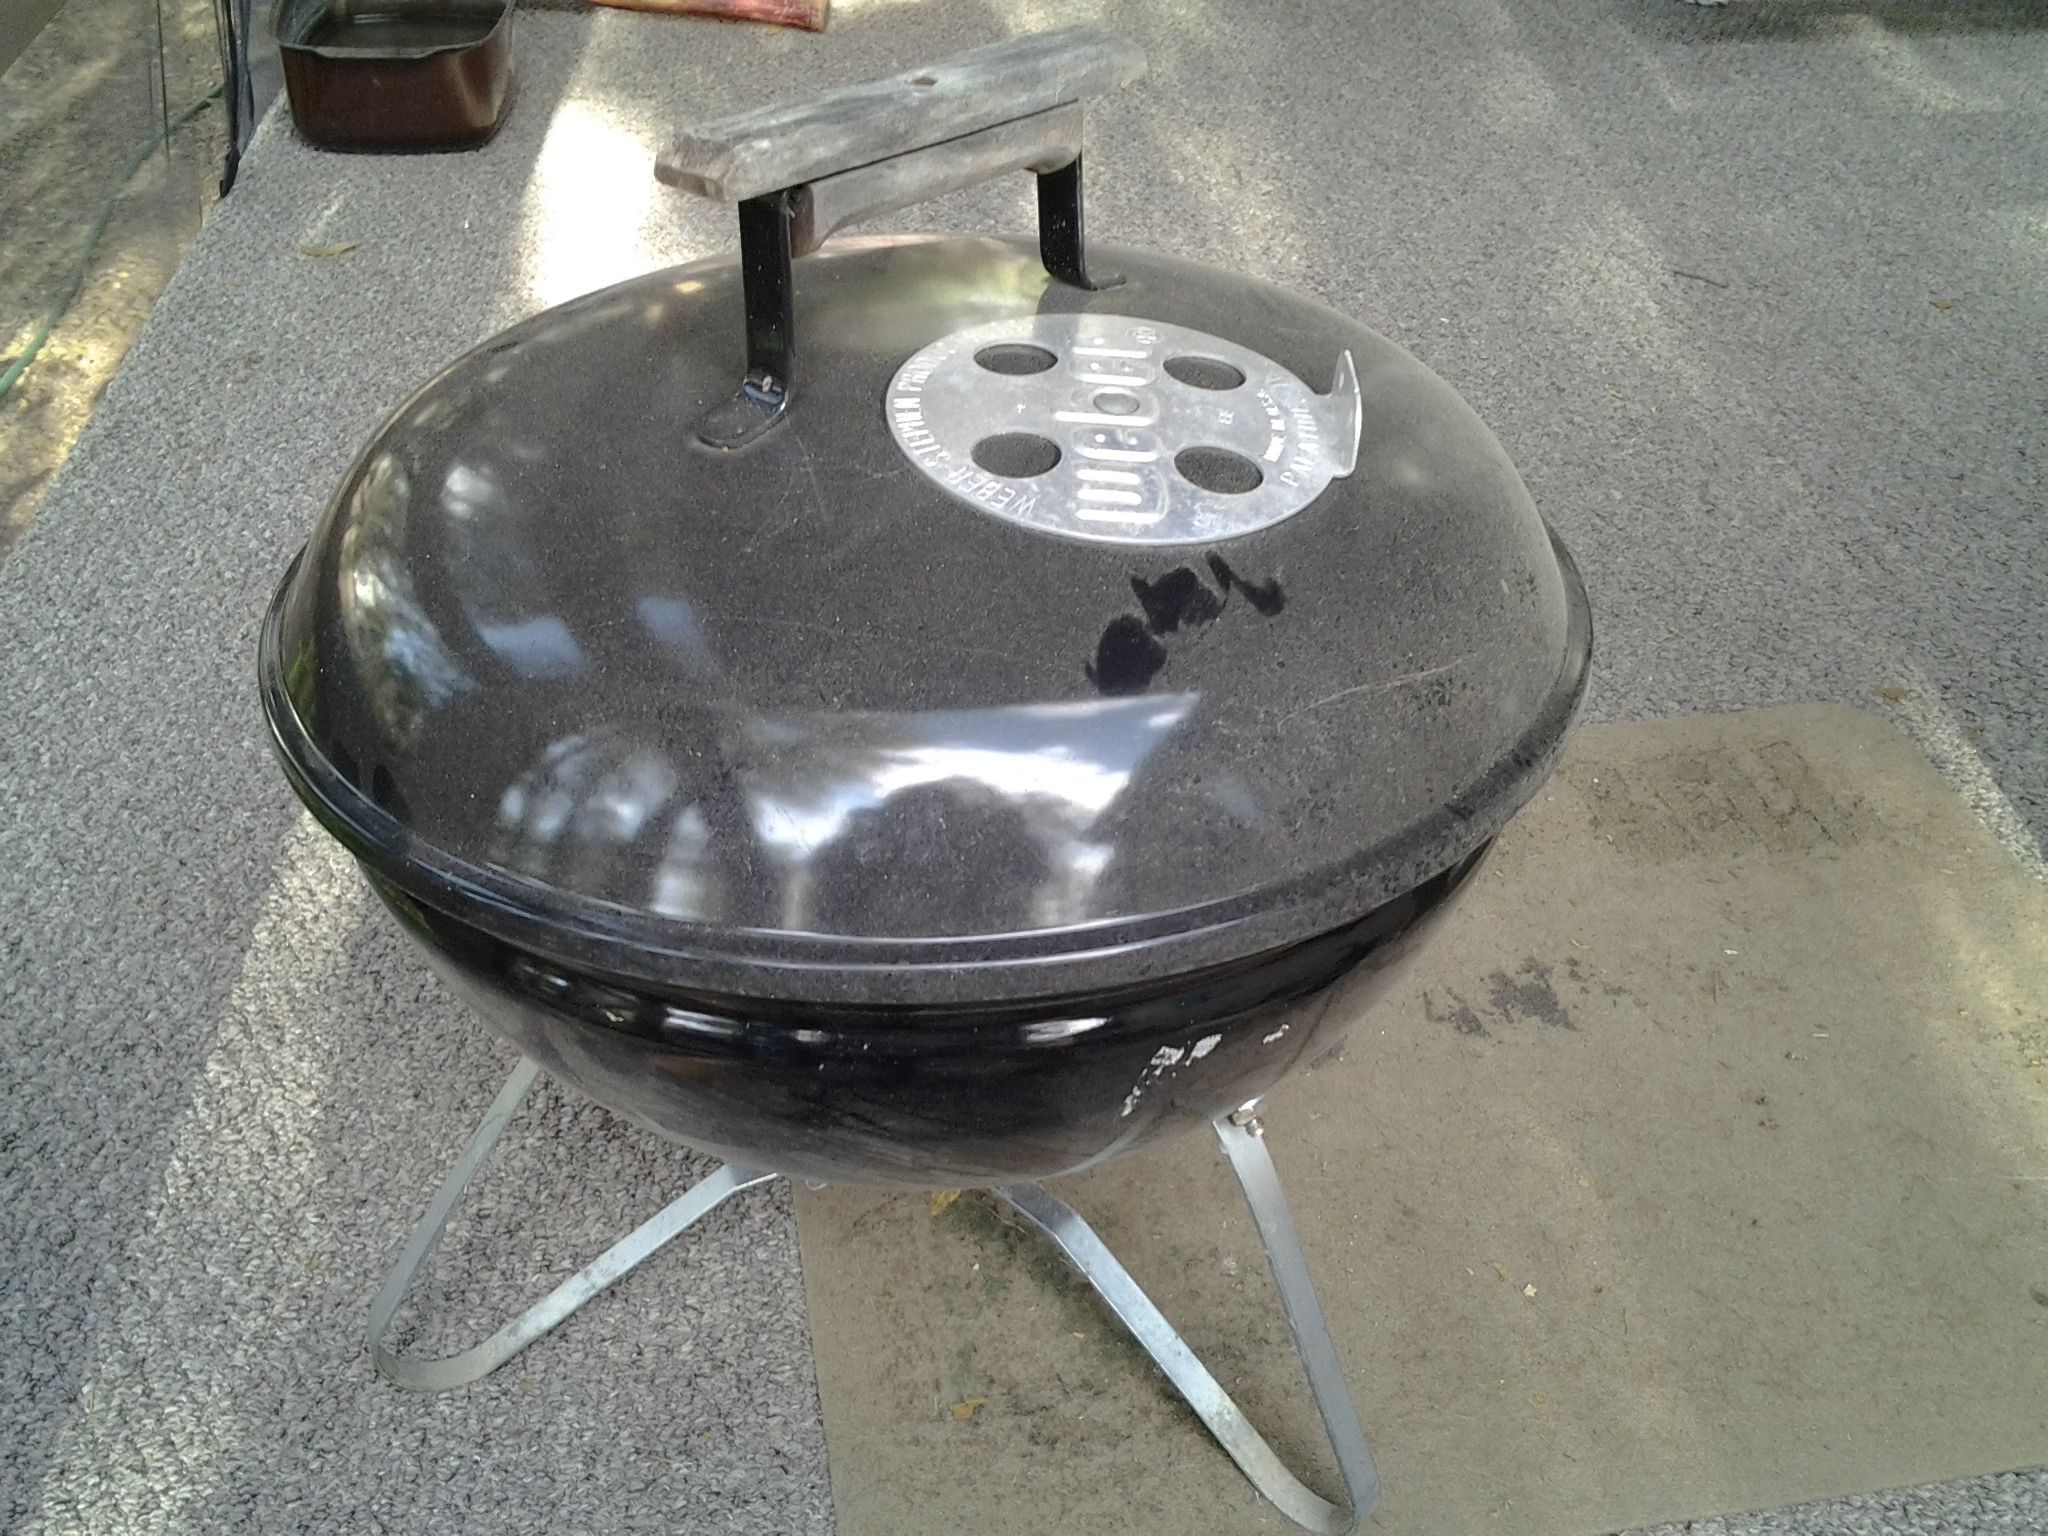 Tabletop Weber barbecue